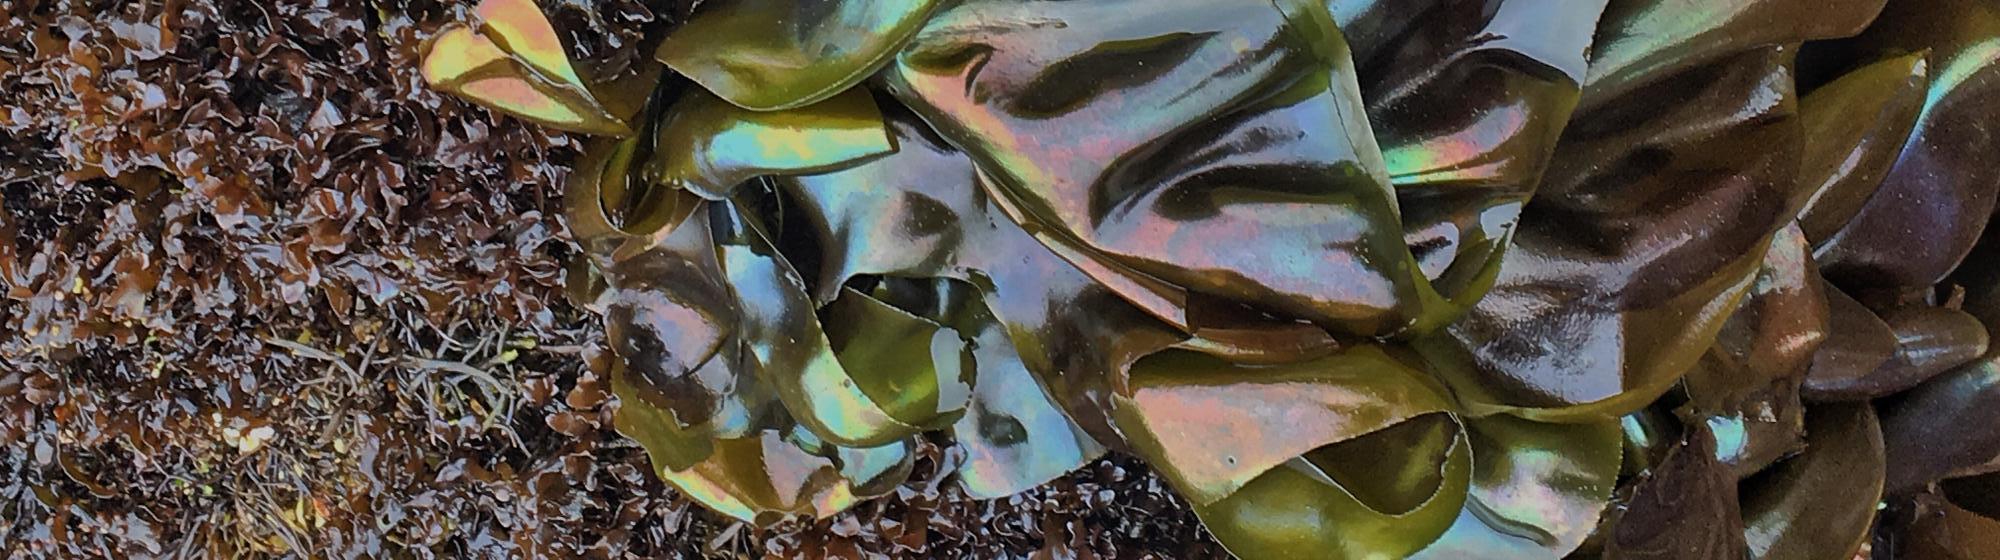 Photo of Kelp in Point Lobos State Natural Reserve. Photo credit: Celie Placzek.